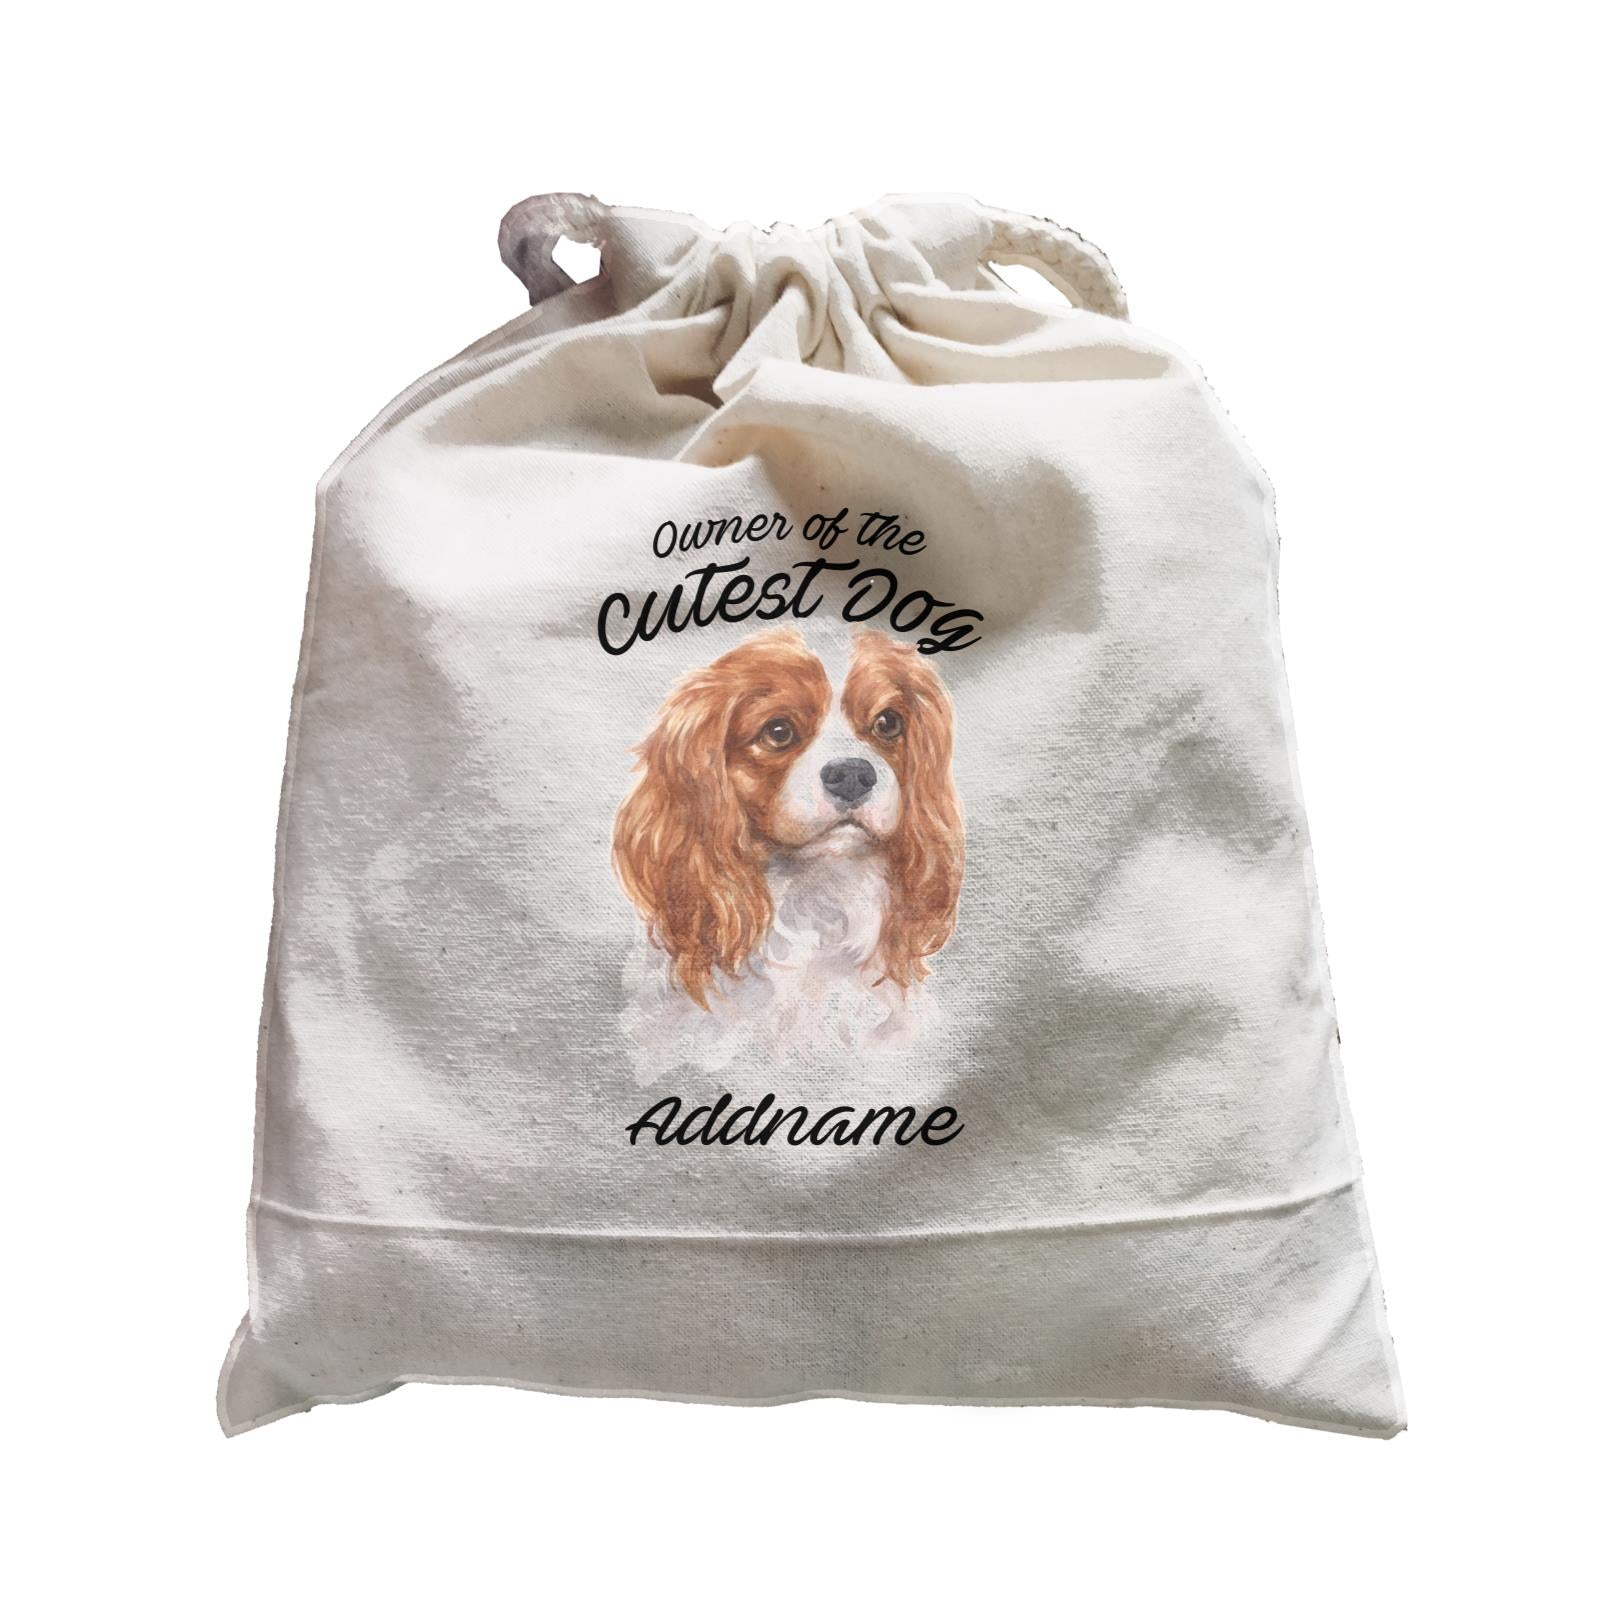 Watercolor Dog Owner Of The Cutest Dog King Charles Spaniel Addname Satchel